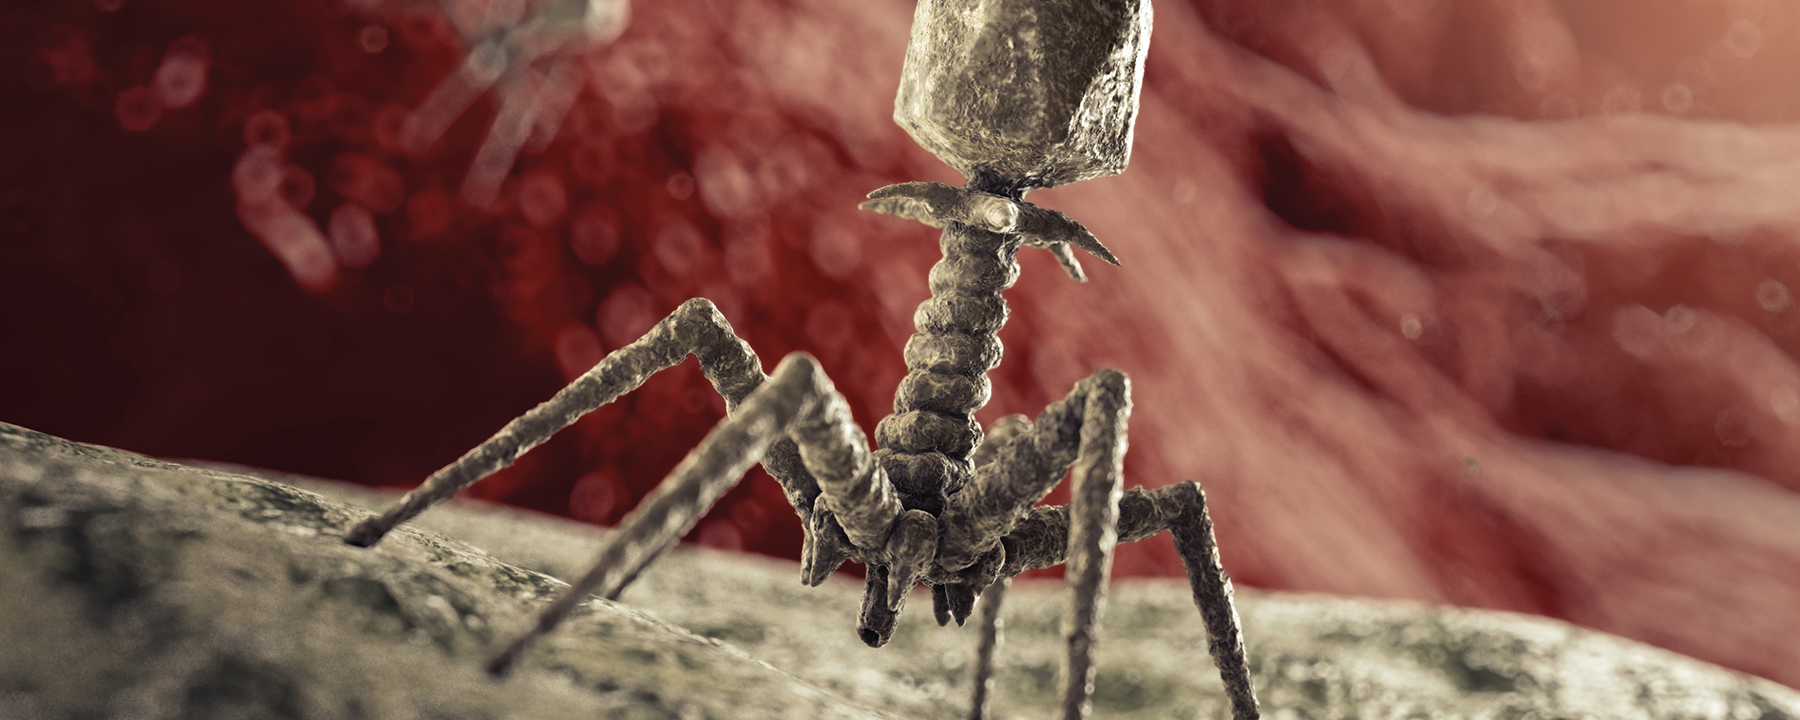 Phage From The Scientist